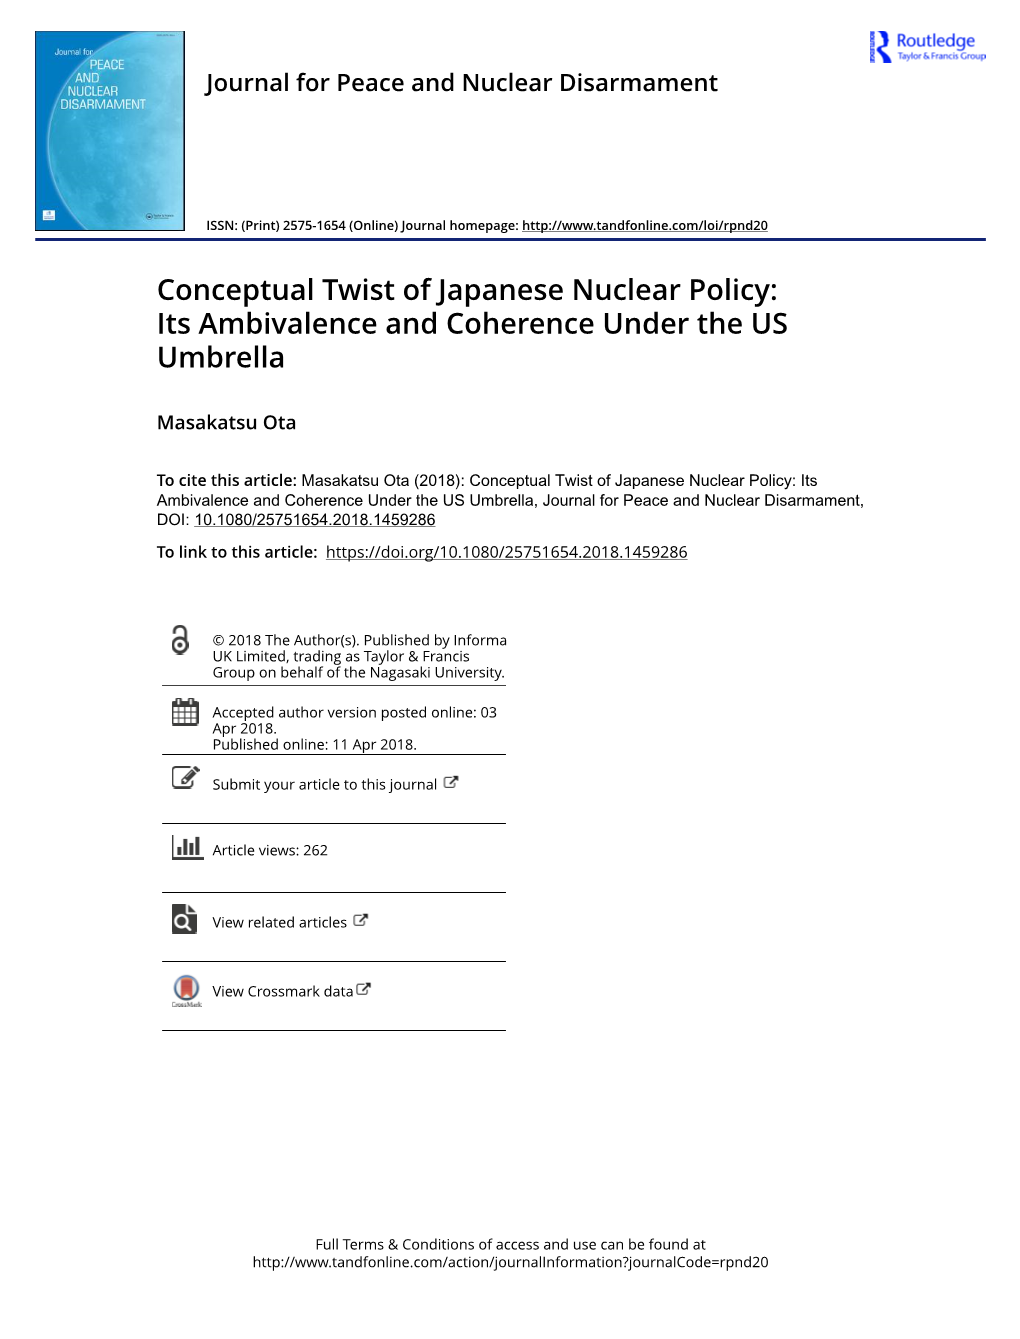 Conceptual Twist of Japanese Nuclear Policy: Its Ambivalence and Coherence Under the US Umbrella